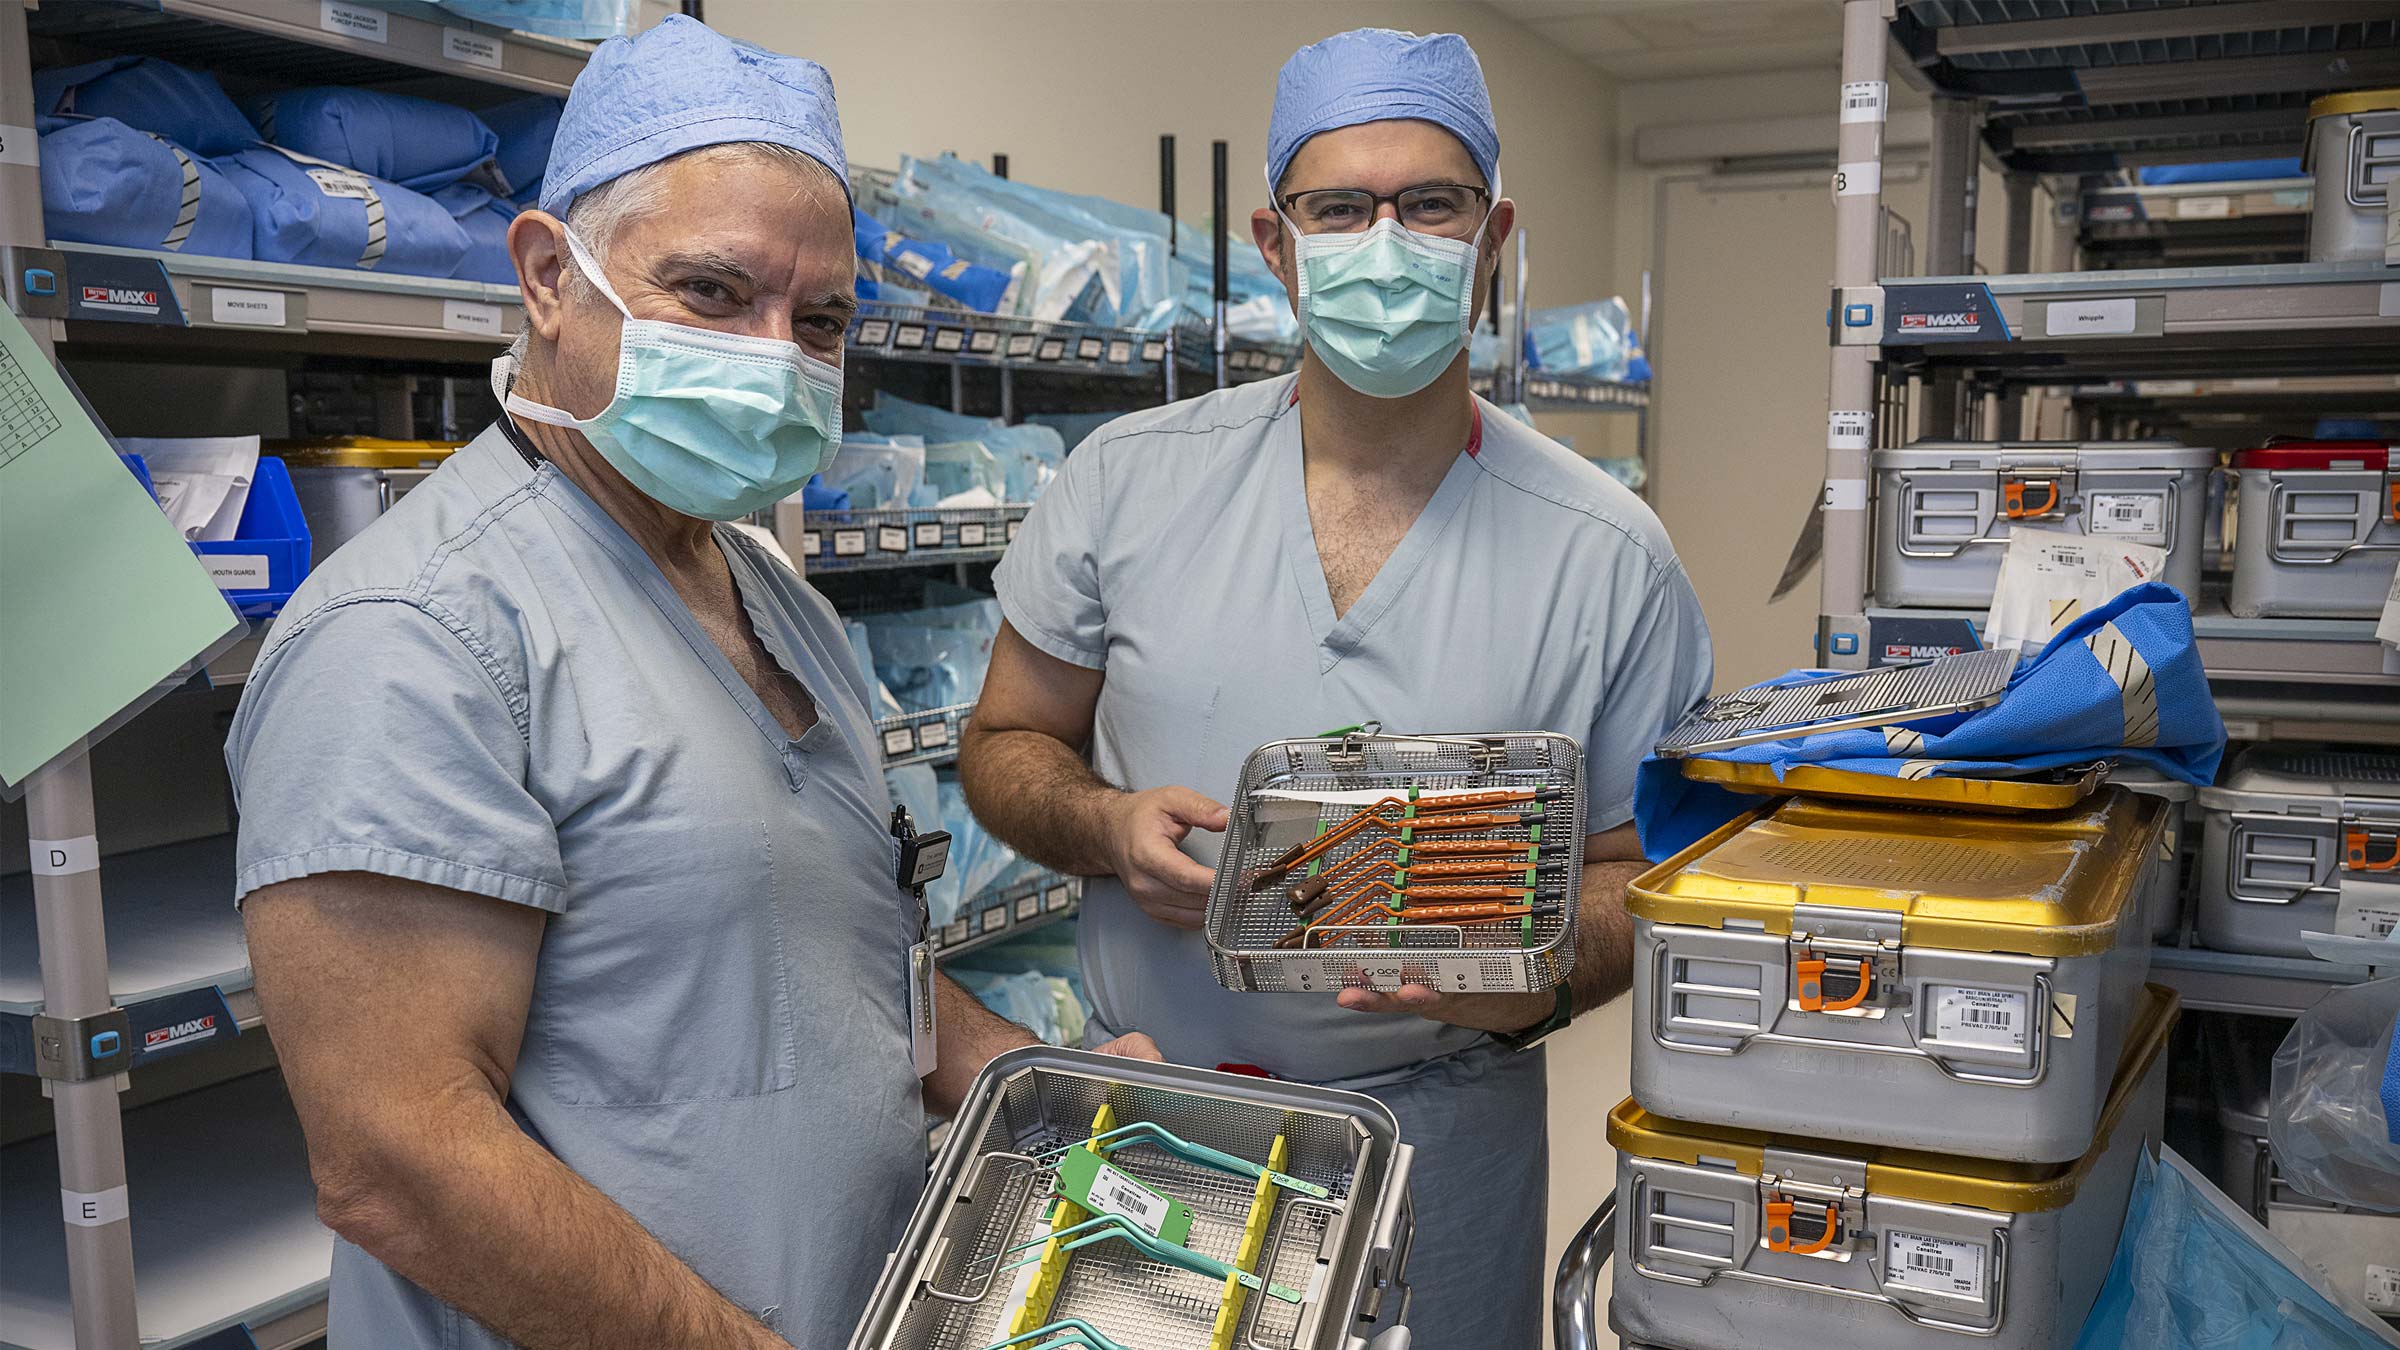 Dr. Carrau and Dr. Prevedello, in scrubs, holding instruments they designed for skull base surgery